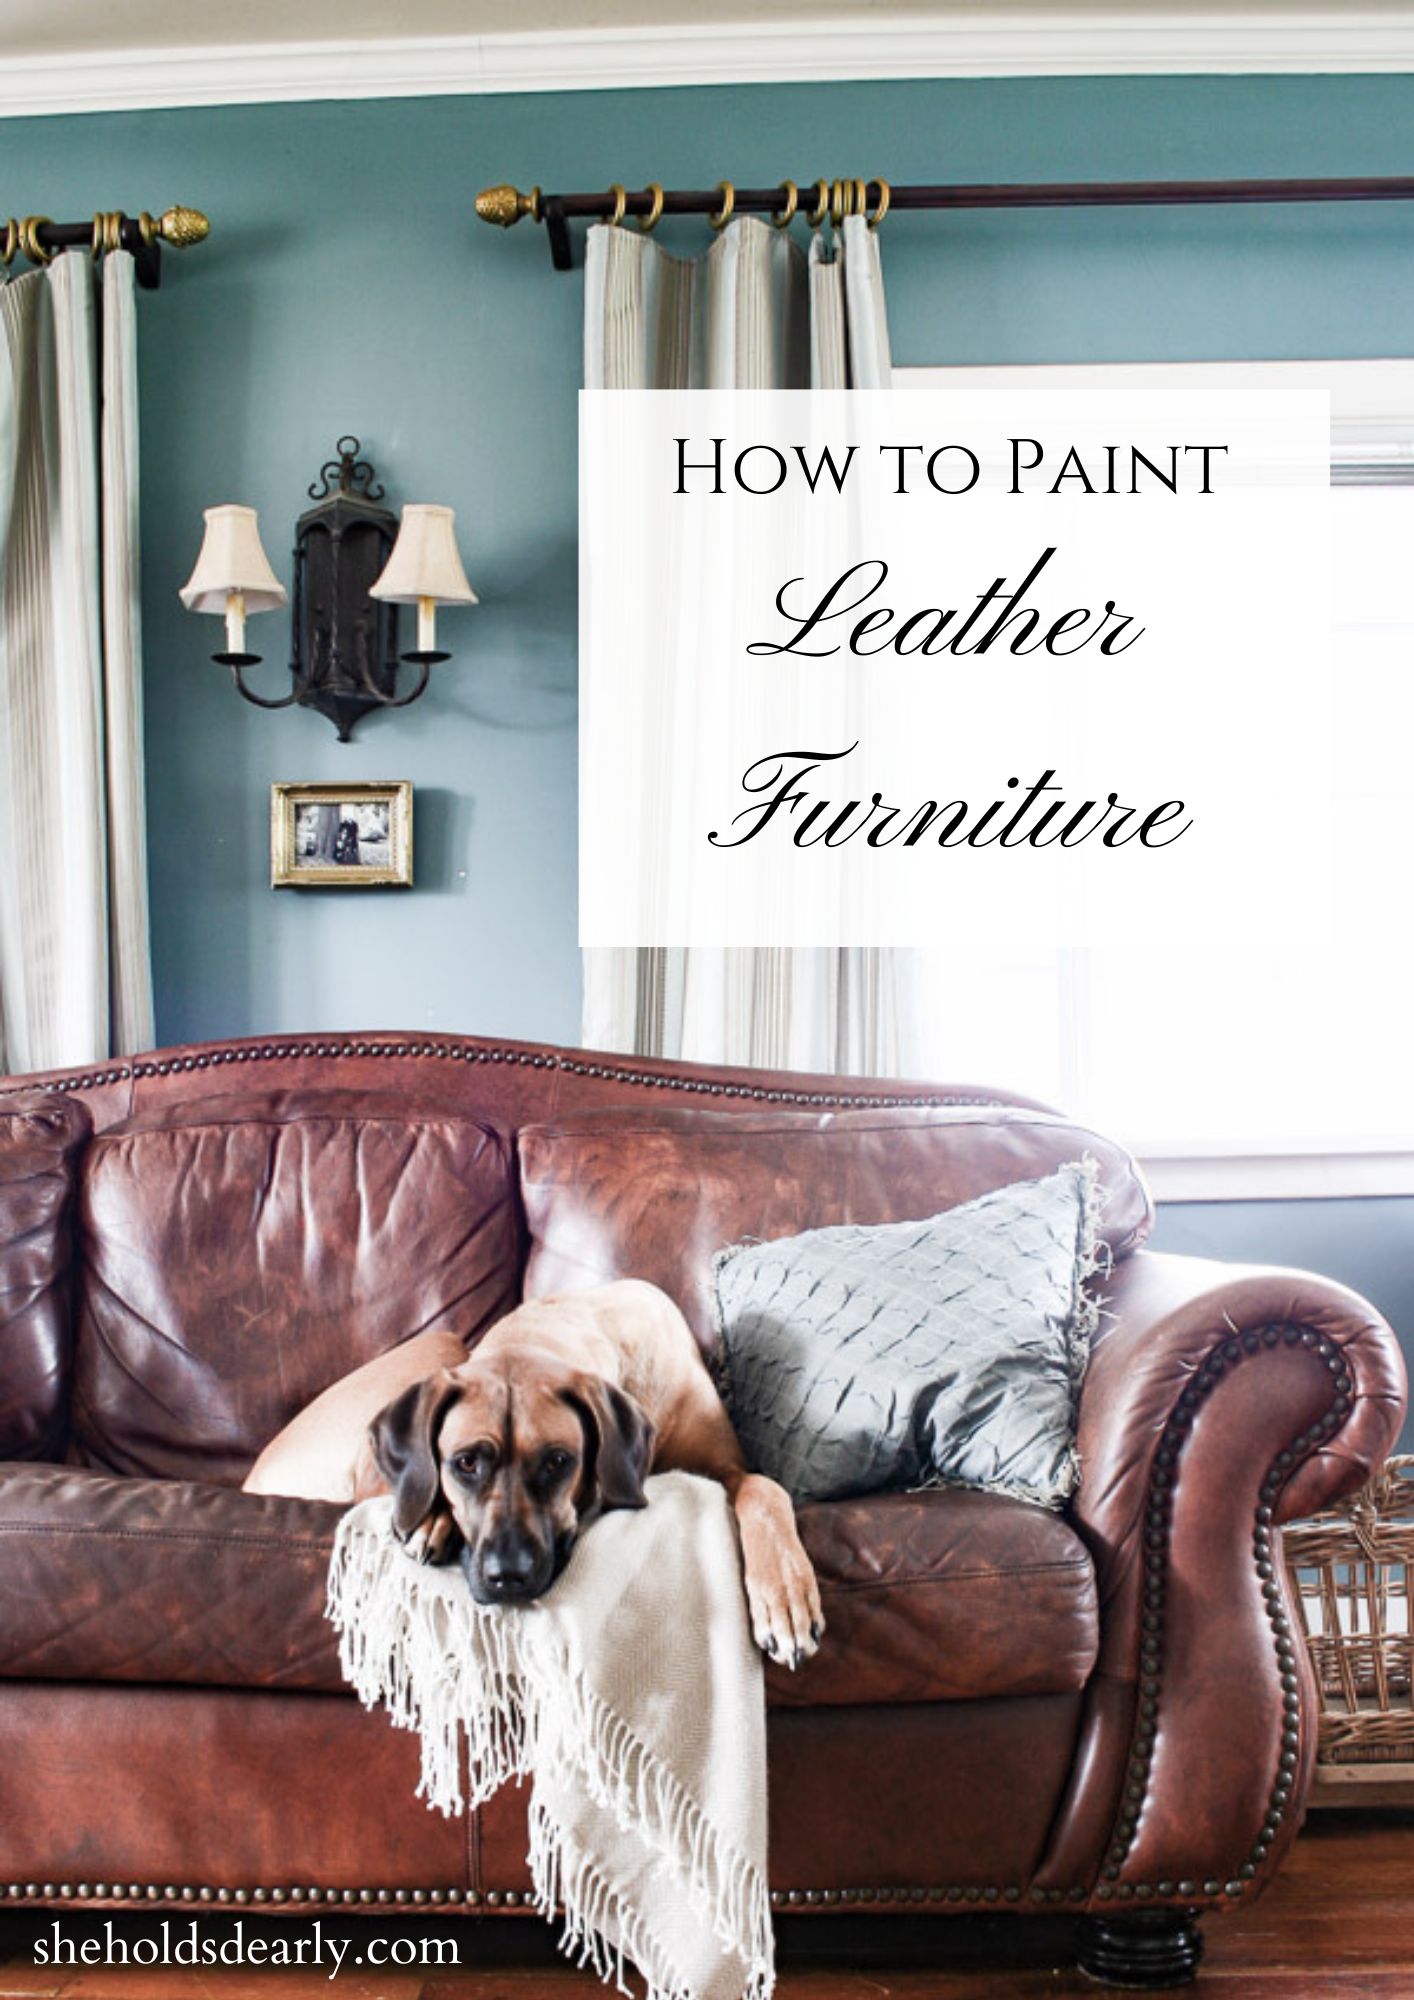 How do I paint a leather couch?